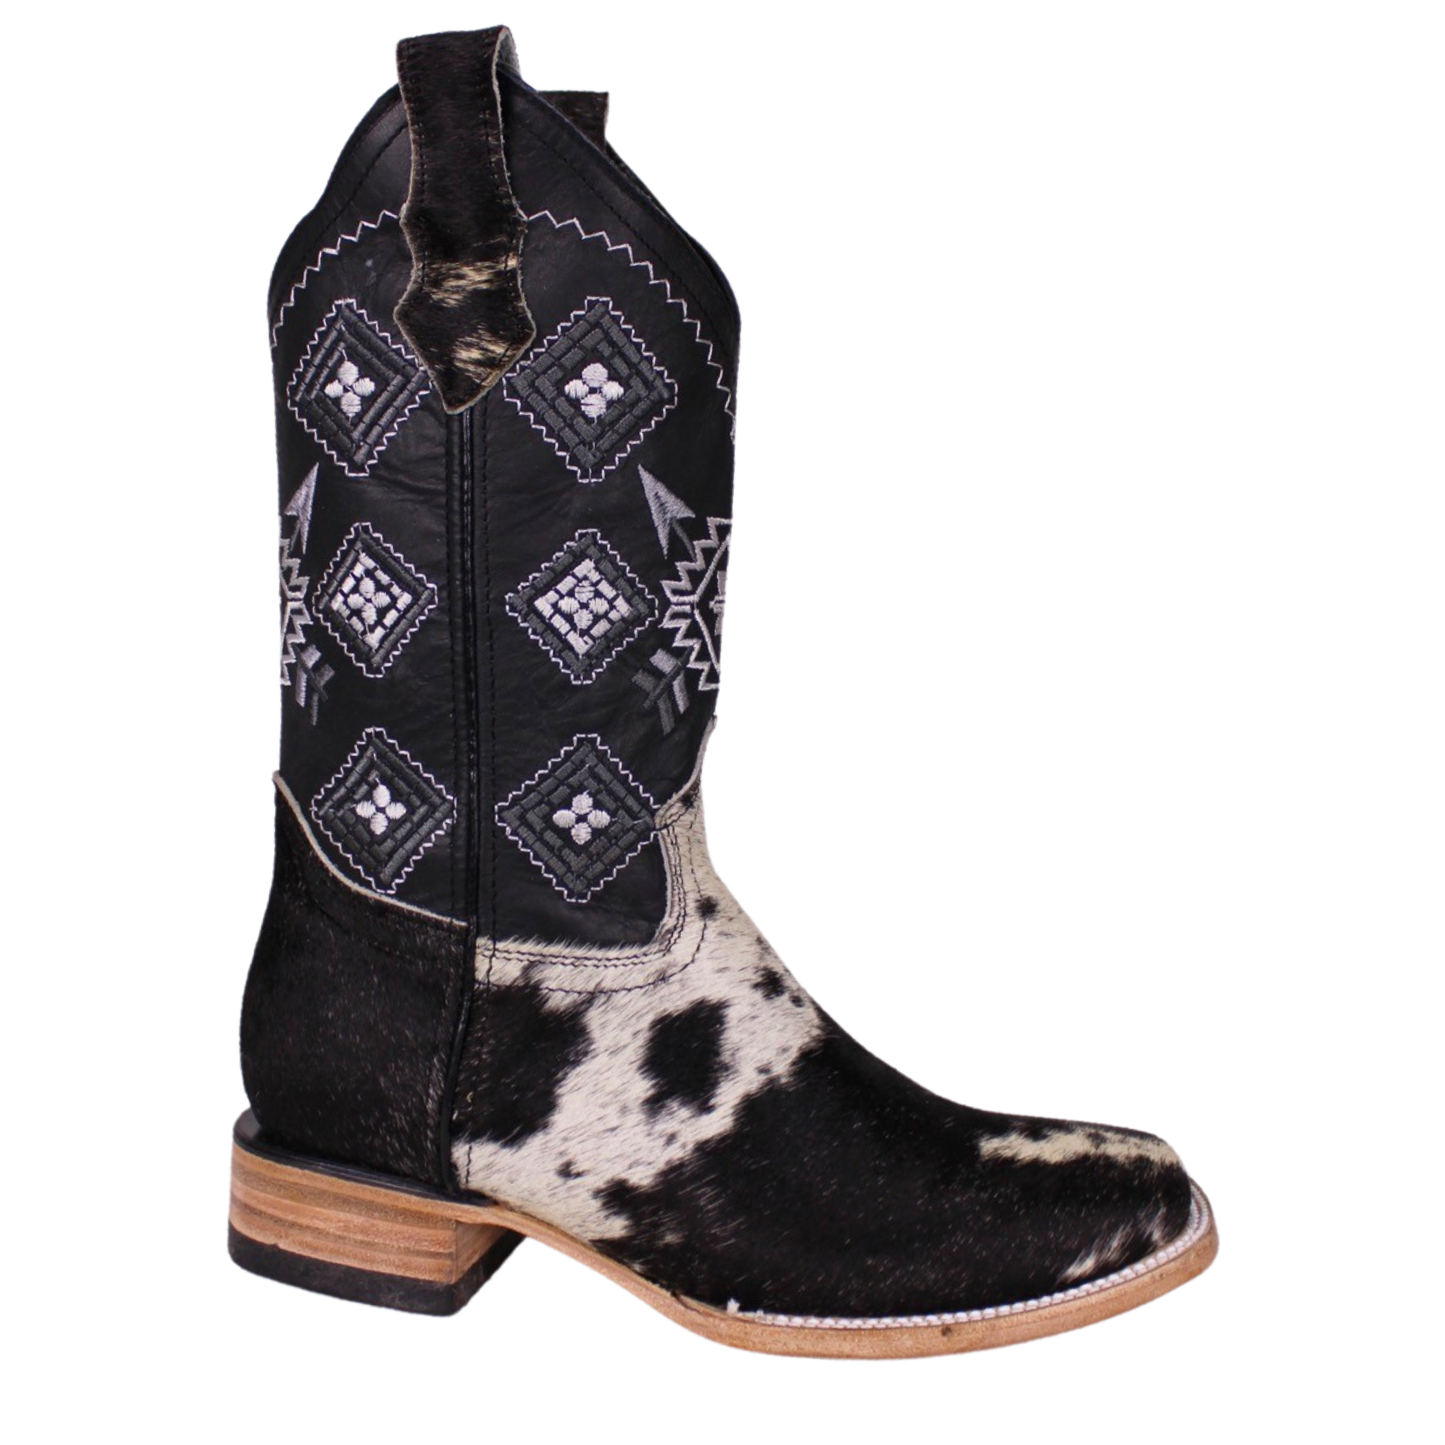 Agave Black/White Cowhide Women Boot